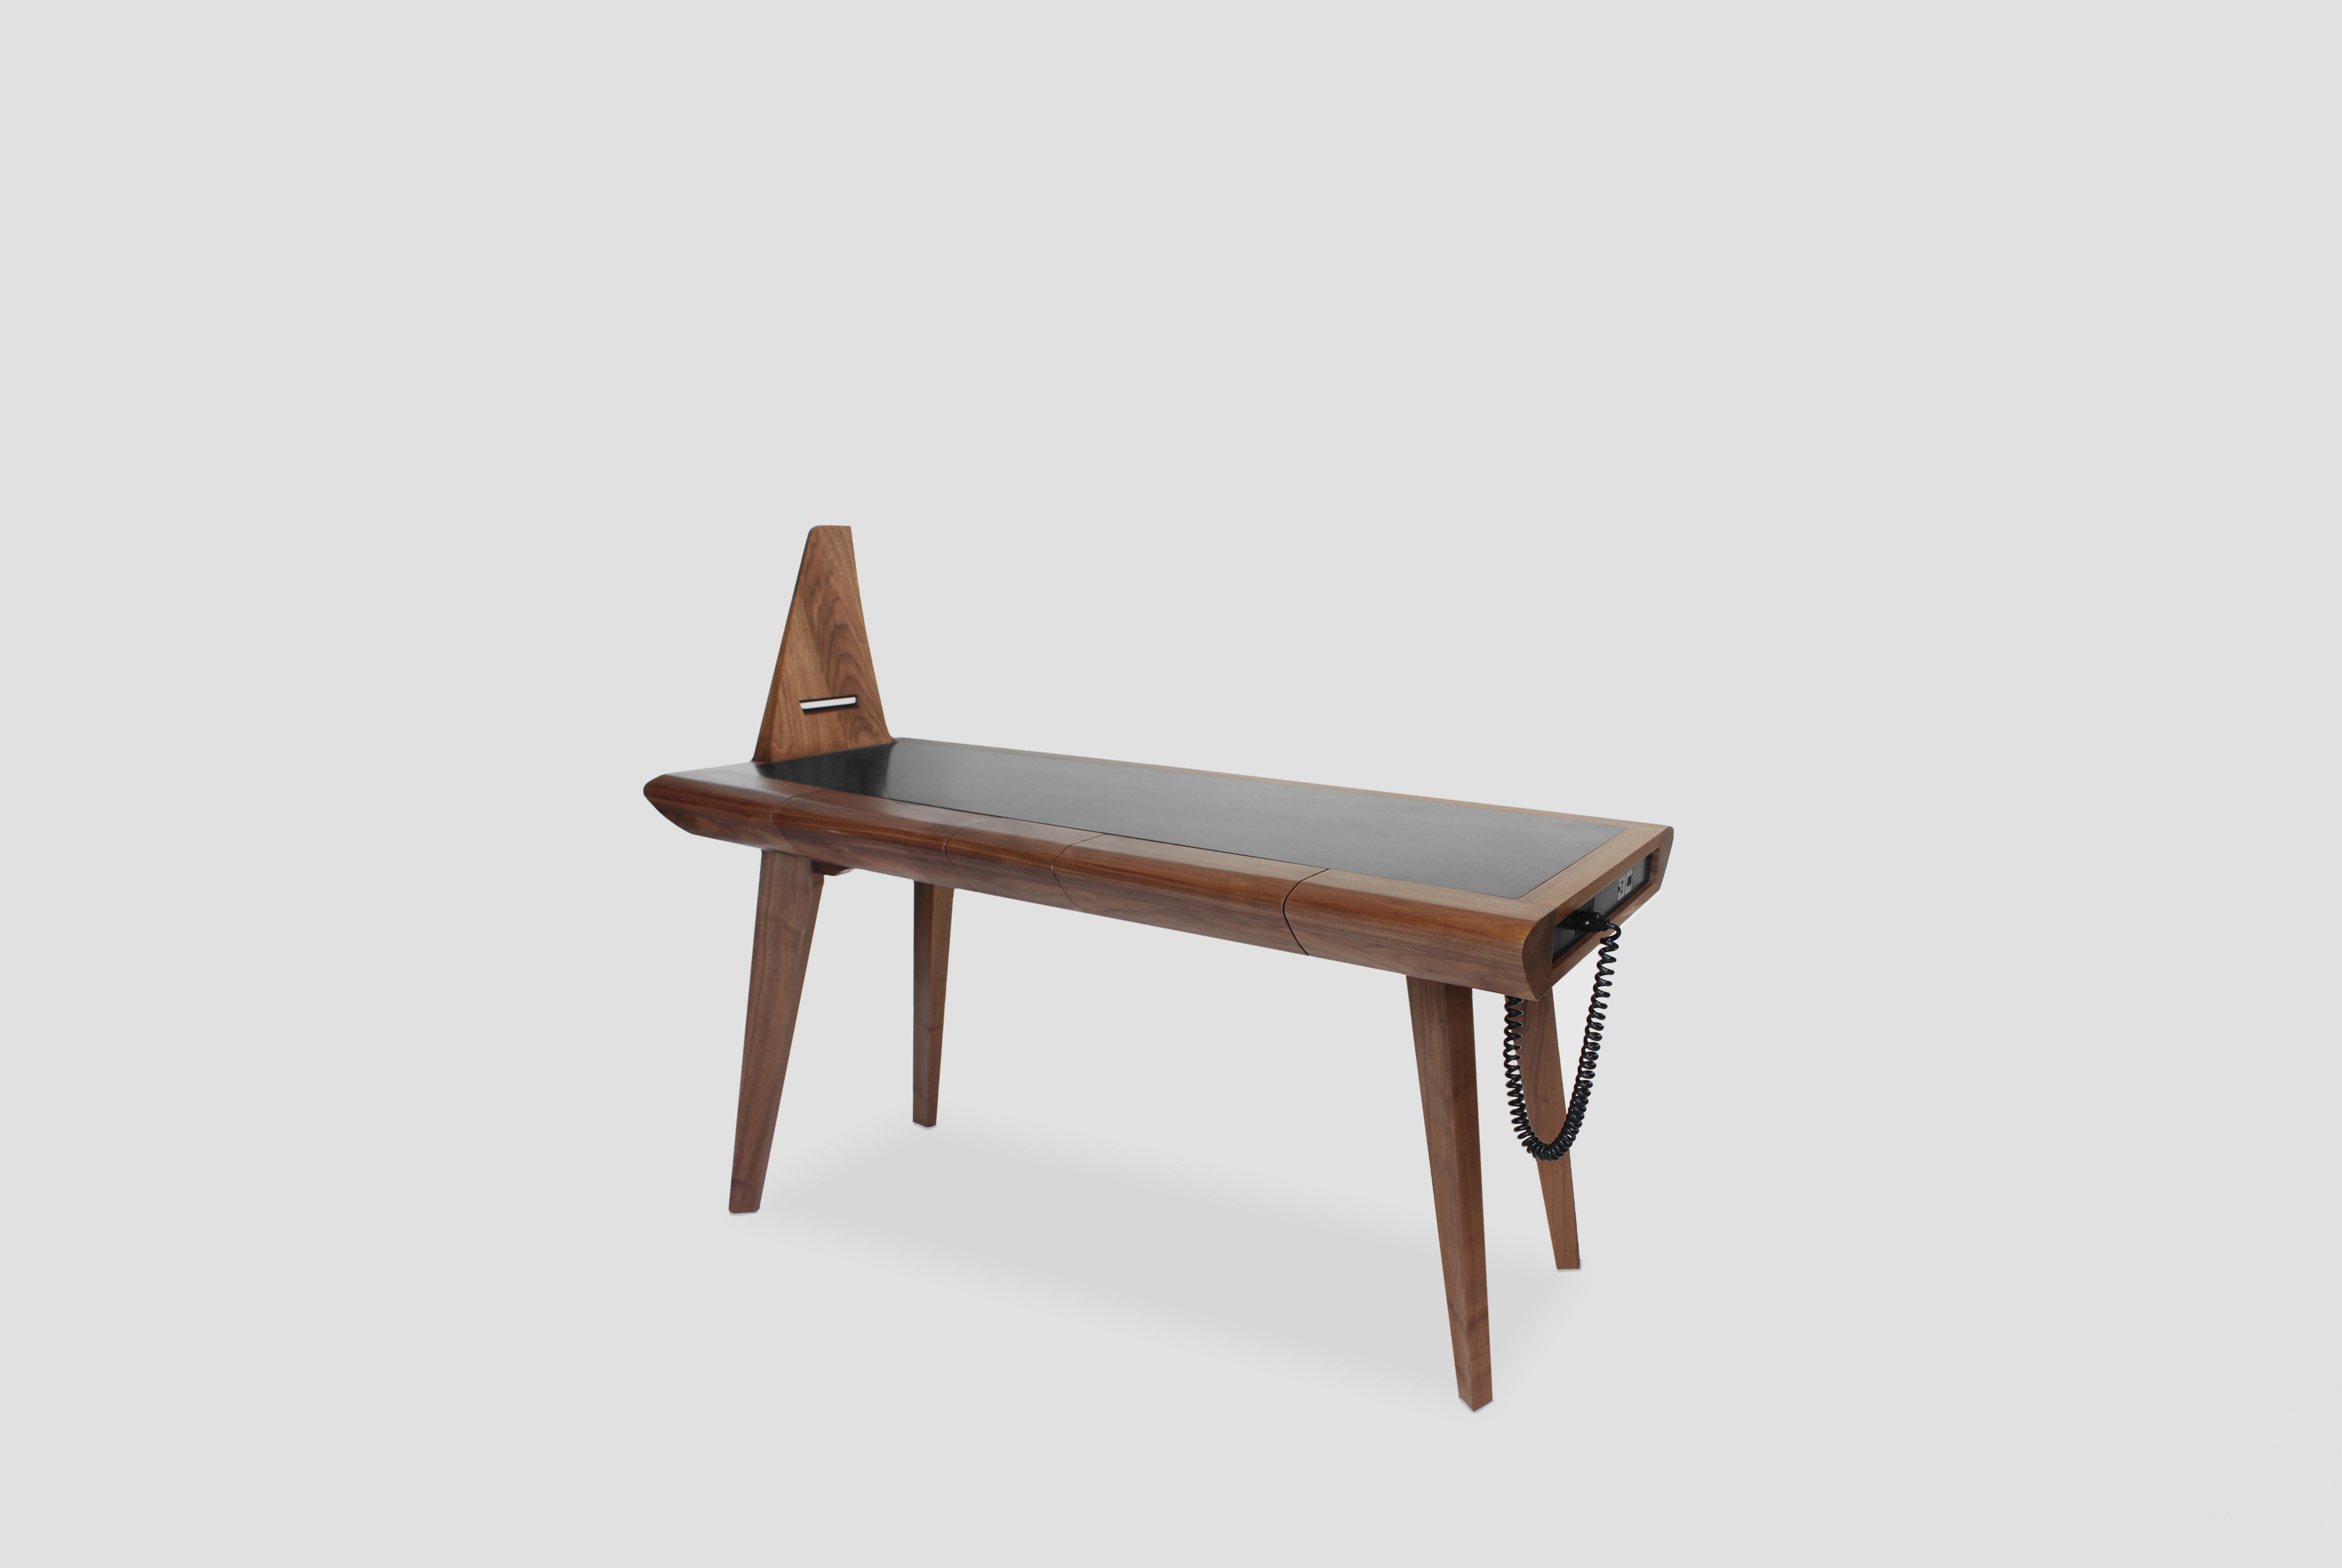 Loewy work table by Arturo Verástegui
Dimensions: D 140 x W 60 x H 75 cm
Materials: walnut wood, corian.

Work table made of walnut and Deep Nocturnal corian.

Arturo Verástegui has been the director and founder of BREUER since 2015. Arturo